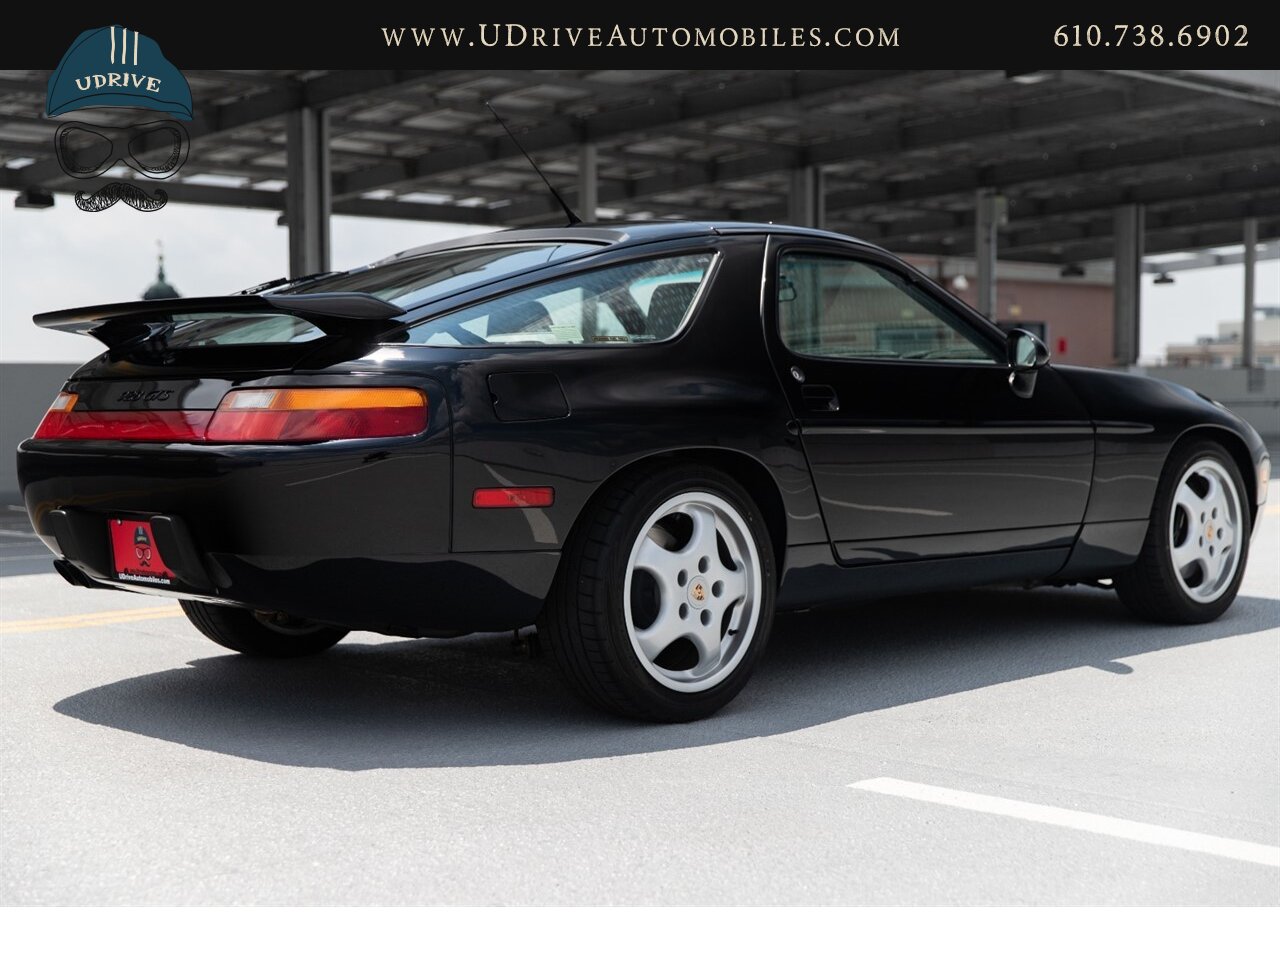 1993 Porsche 928 GTS Ultra Rare 5 Speed Service History  Collector Grade Example - Photo 17 - West Chester, PA 19382